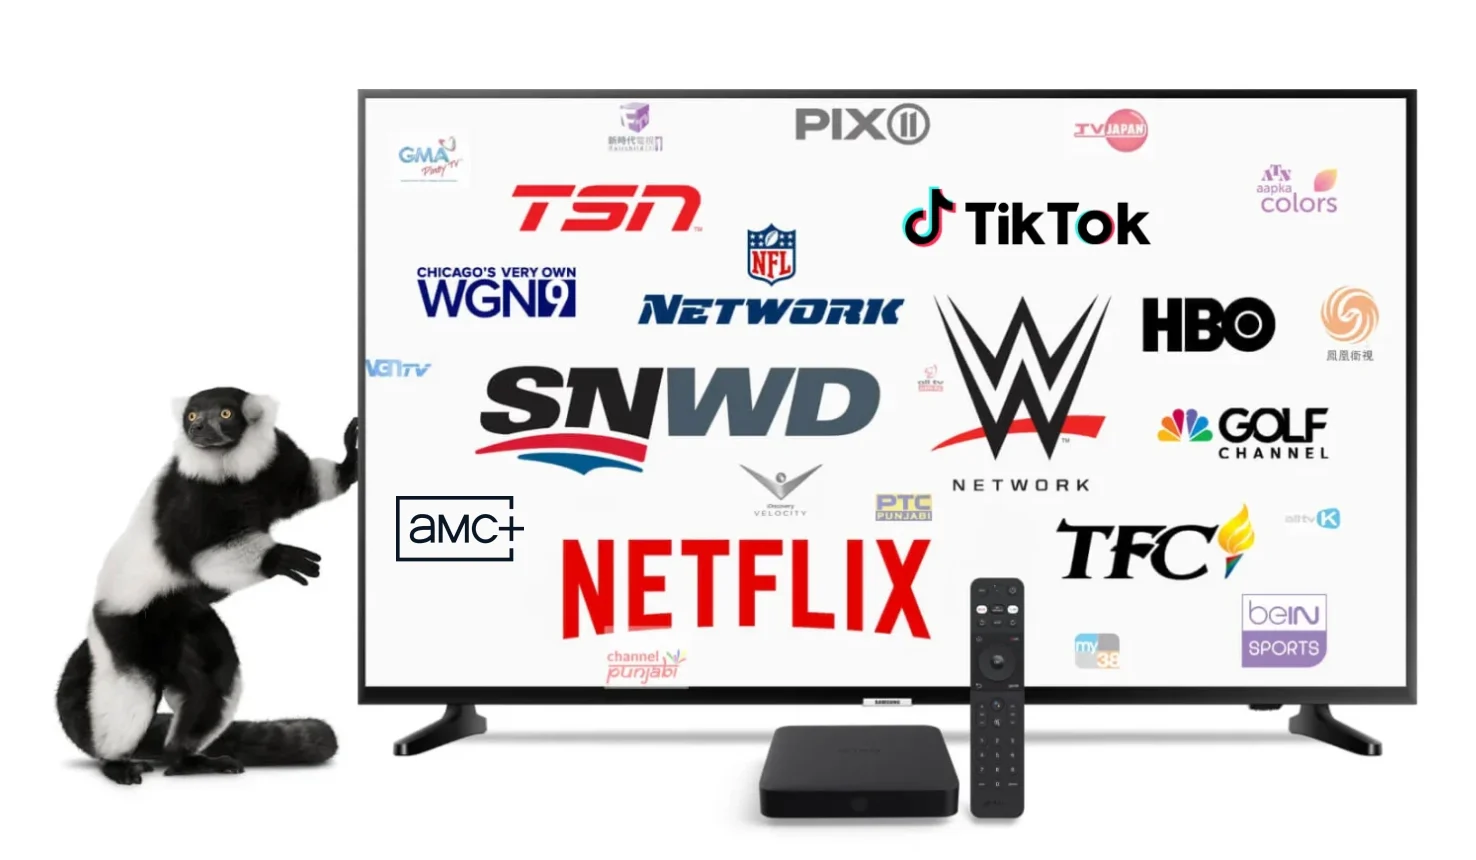 Lemur leaning against large smart tv showing a variety of channel logos available on Optik TV, plus set top box and remote